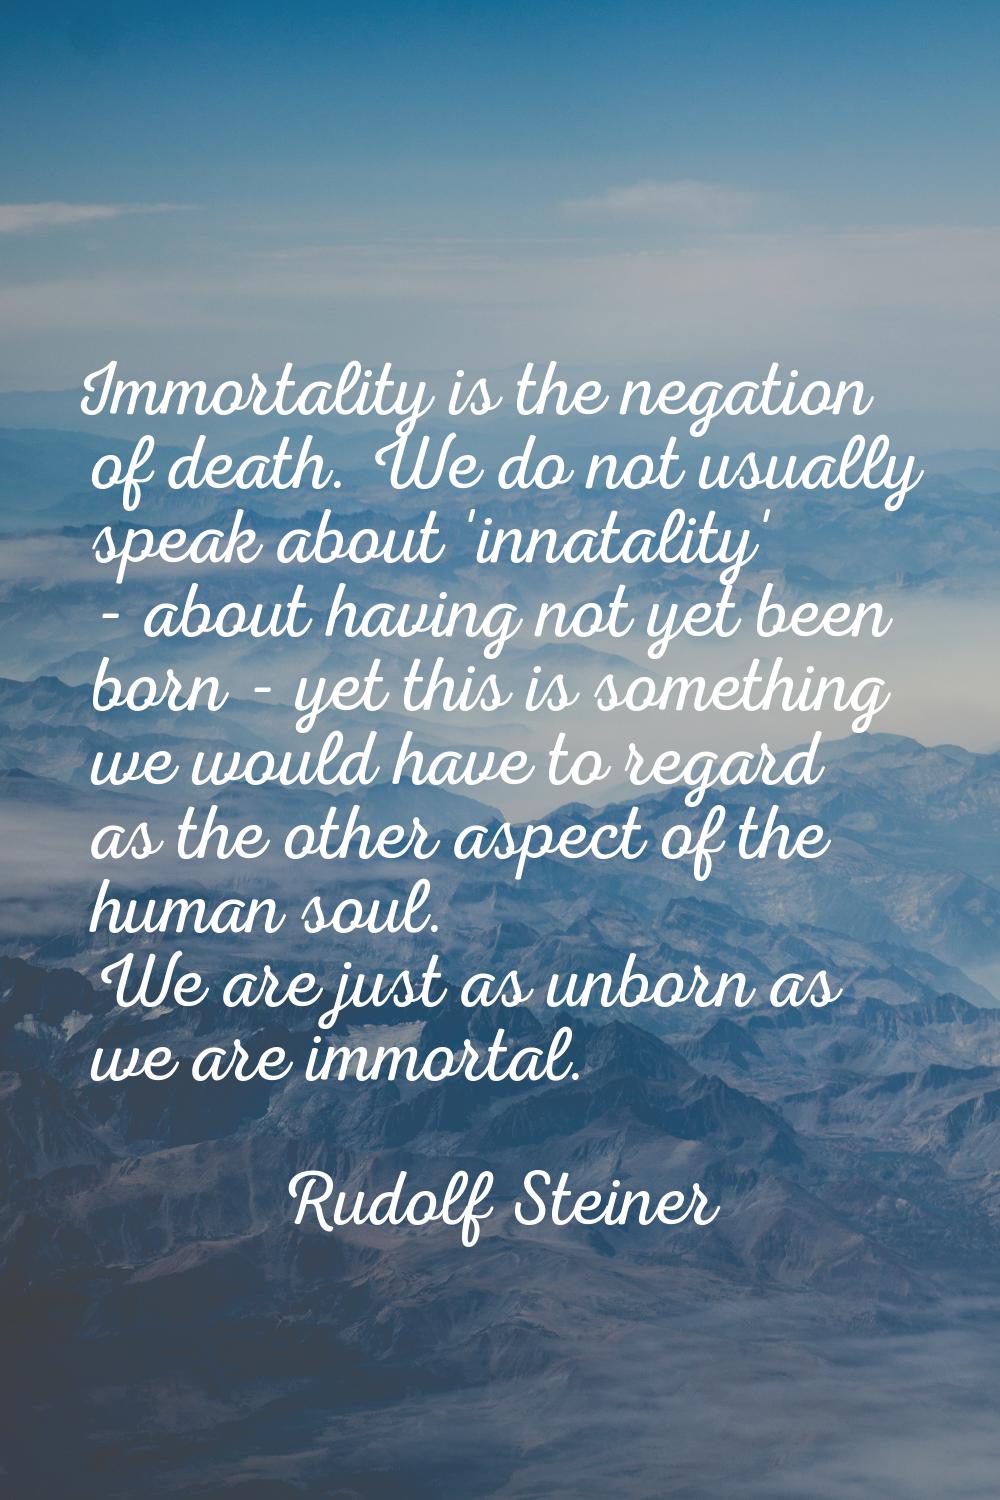 Immortality is the negation of death. We do not usually speak about 'innatality' - about having not